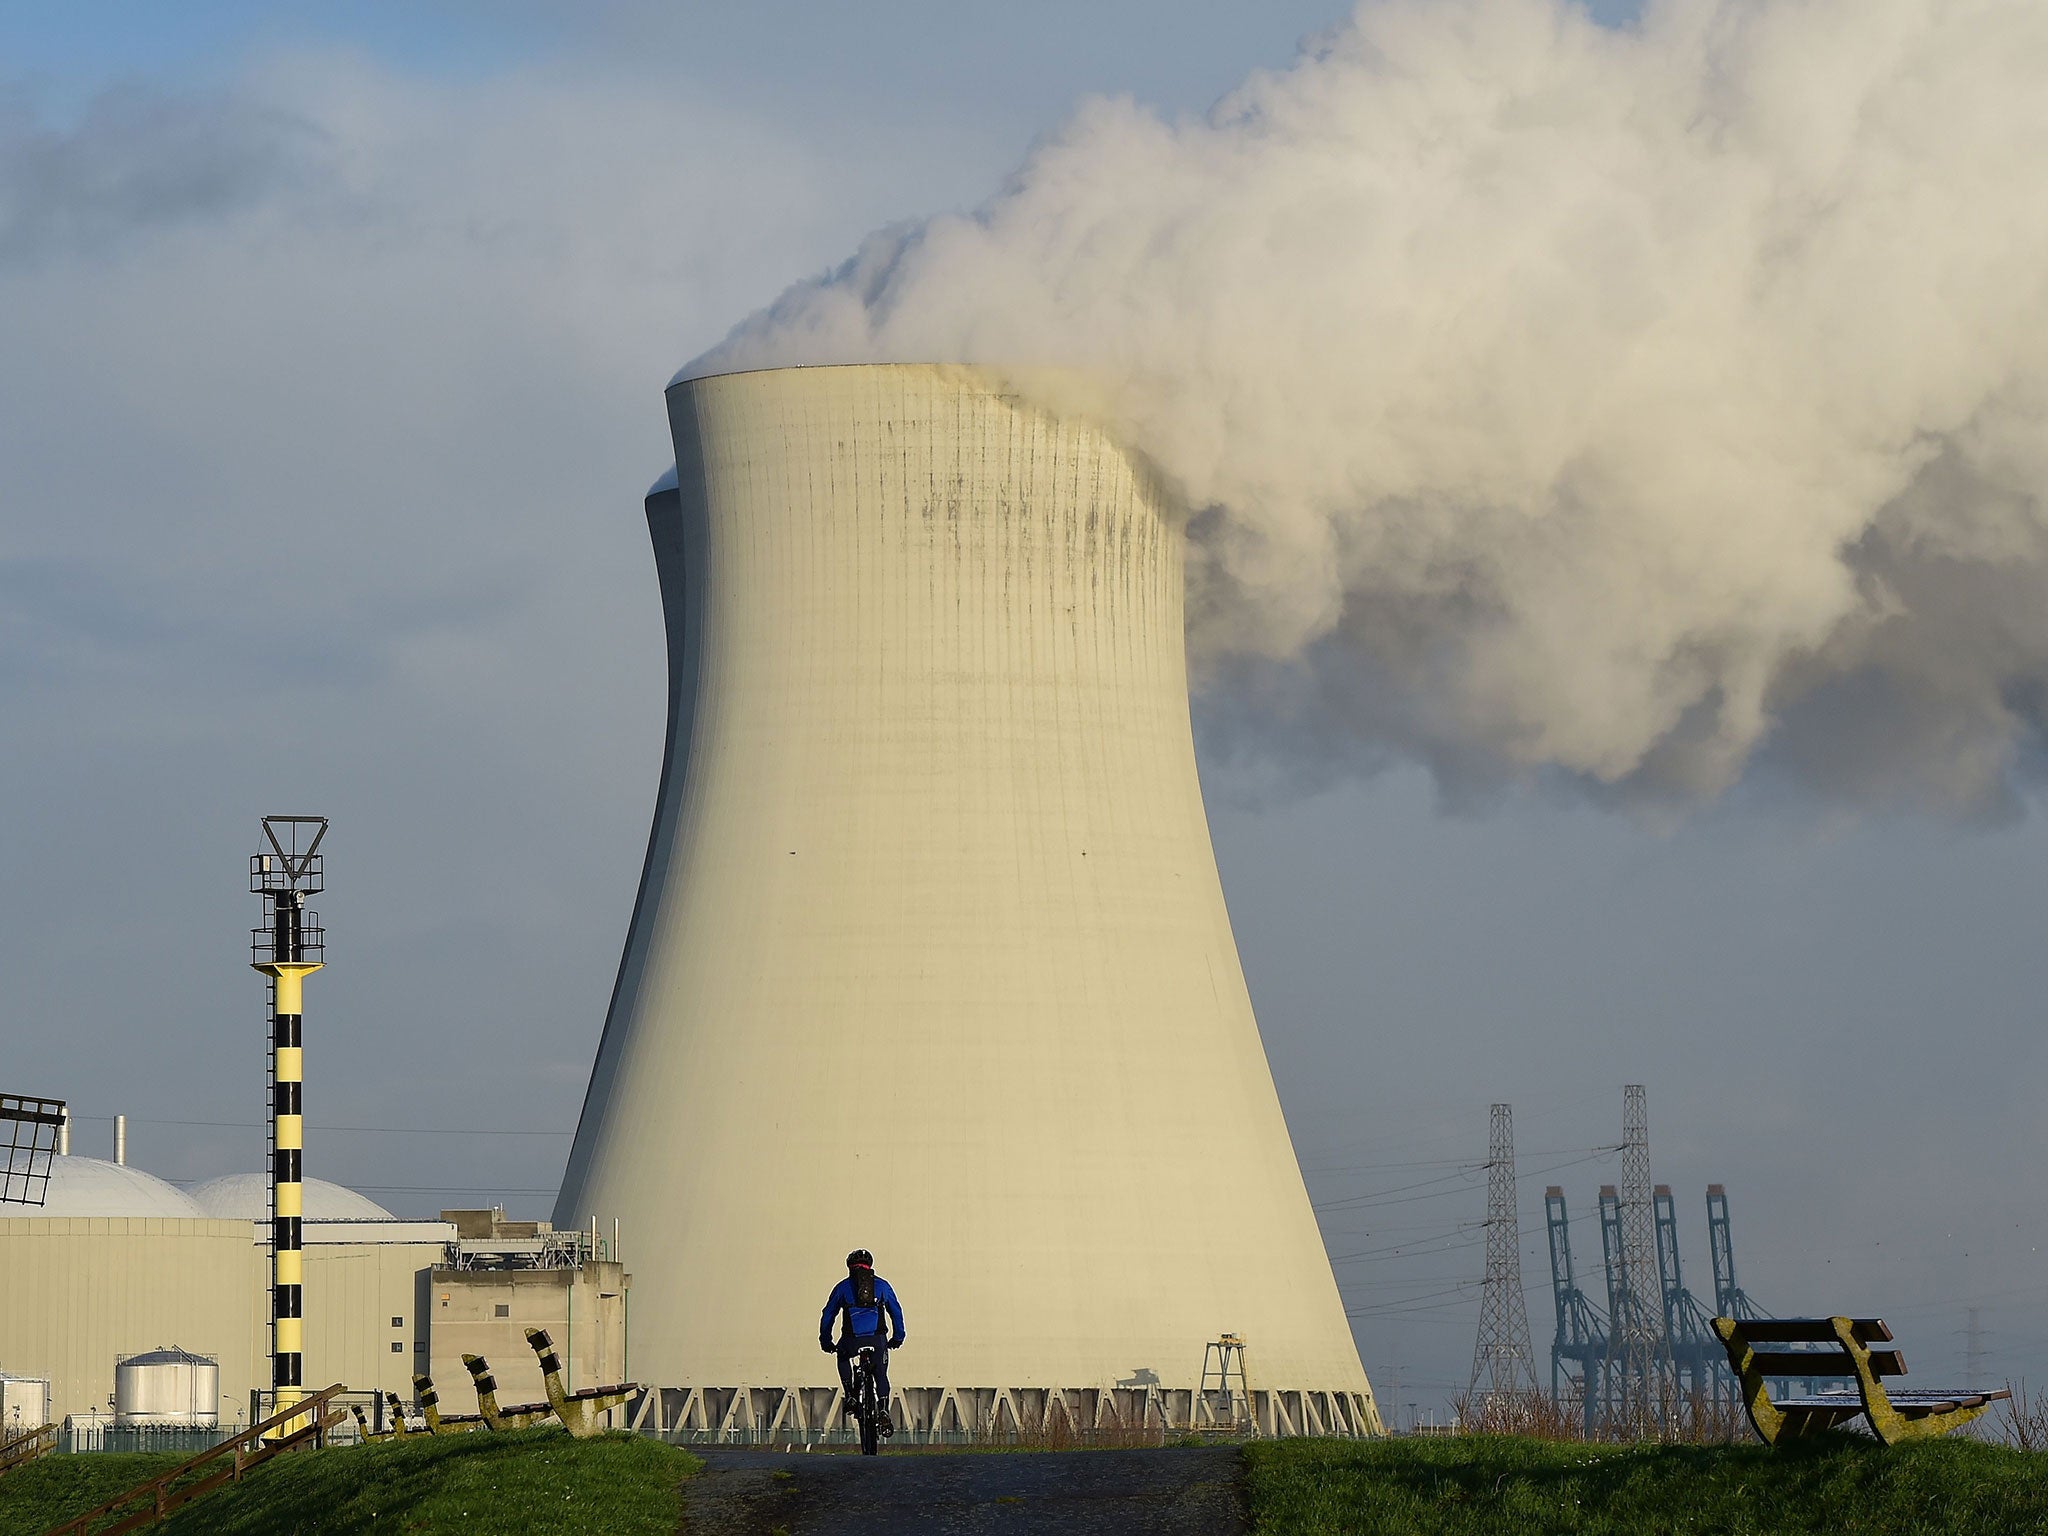 Concerns over security at nuclear plants have led to workers having their passes revoked